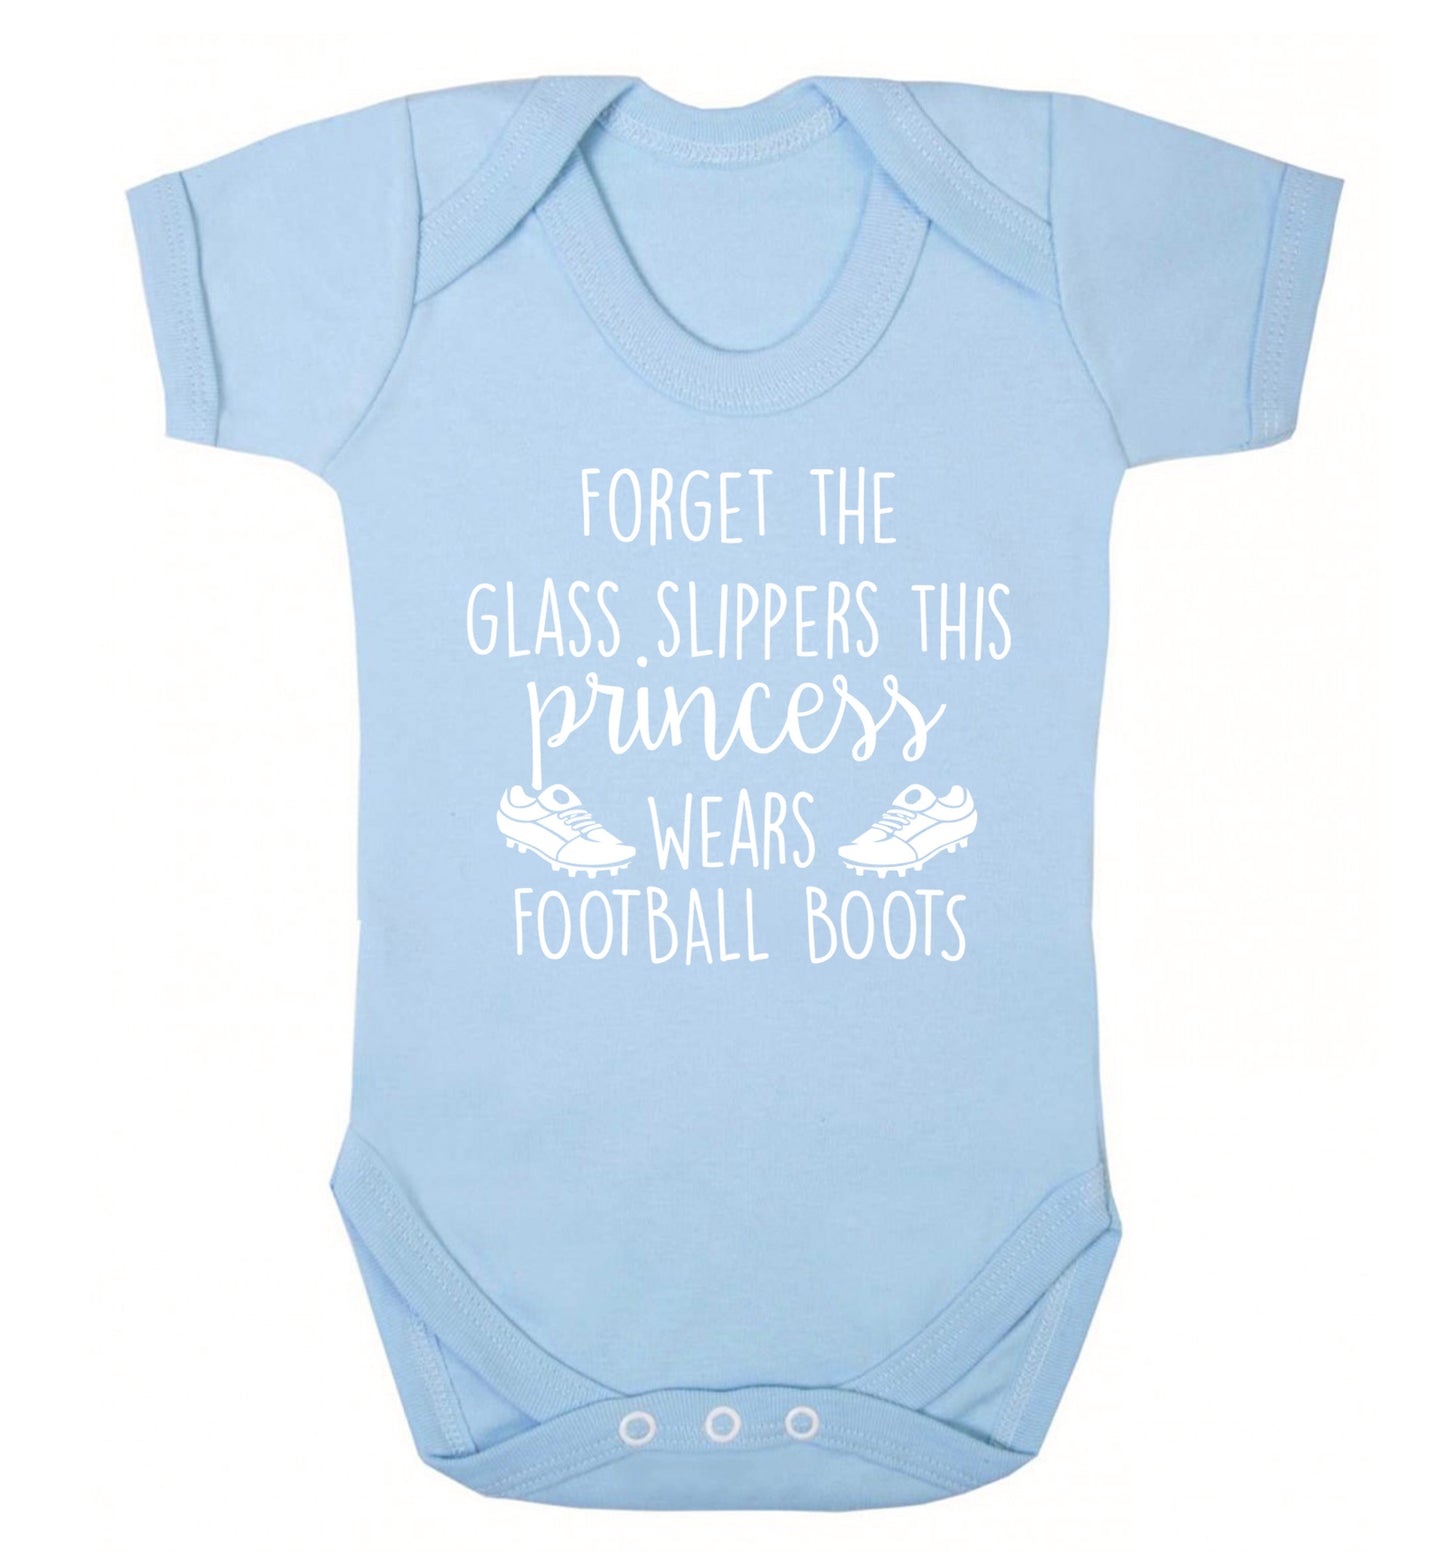 Forget the glass slippers this princess wears football boots Baby Vest pale blue 18-24 months